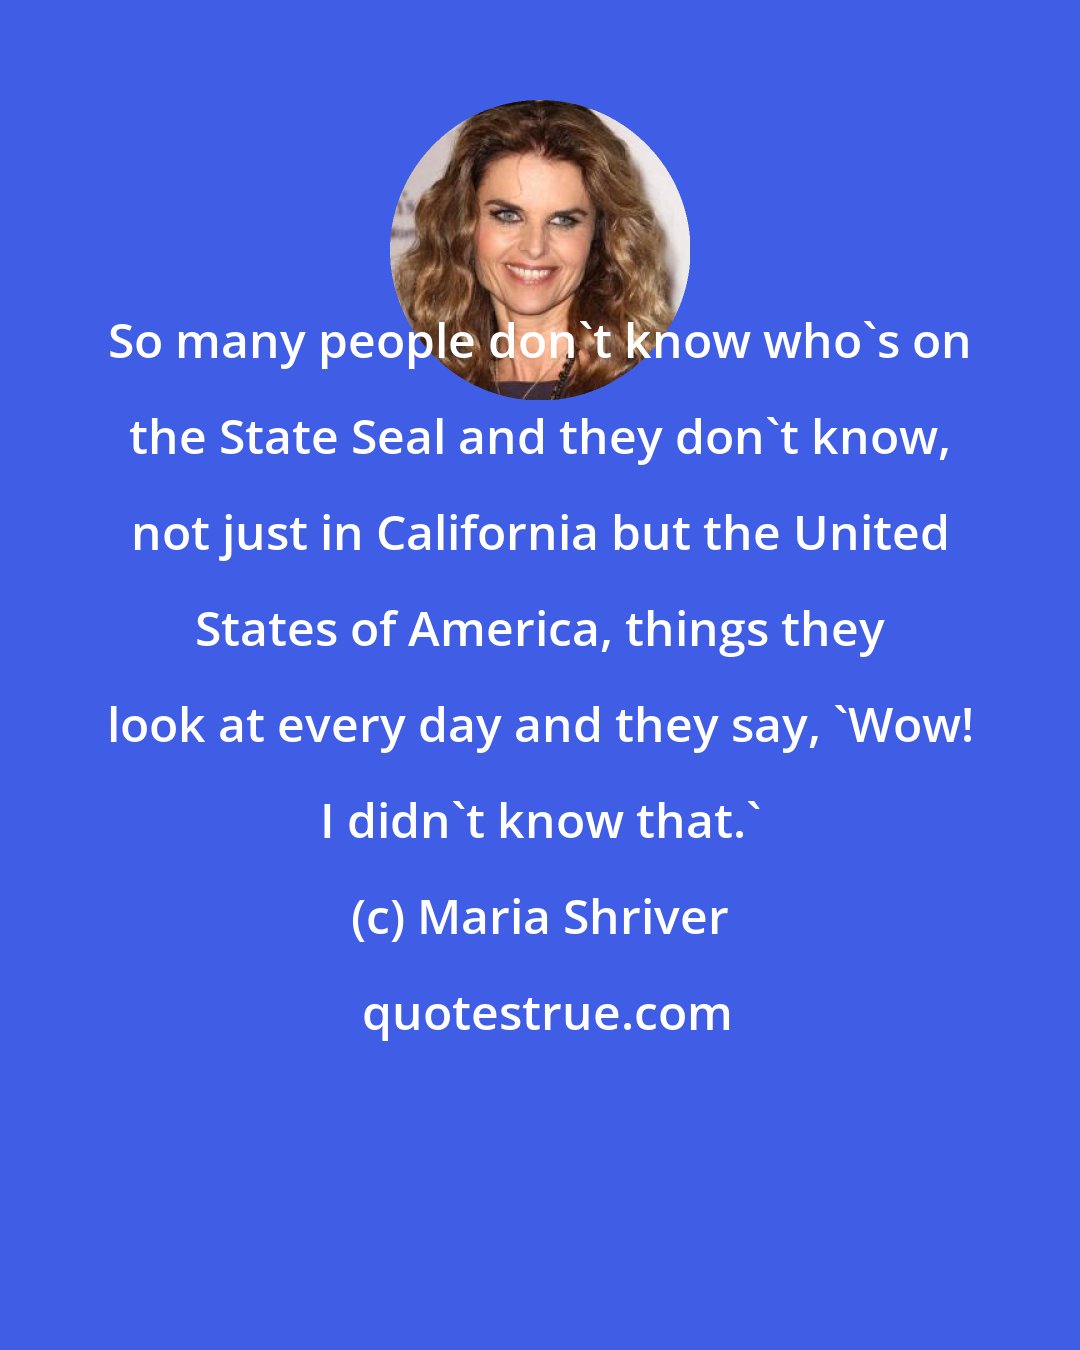 Maria Shriver: So many people don't know who's on the State Seal and they don't know, not just in California but the United States of America, things they look at every day and they say, 'Wow! I didn't know that.'